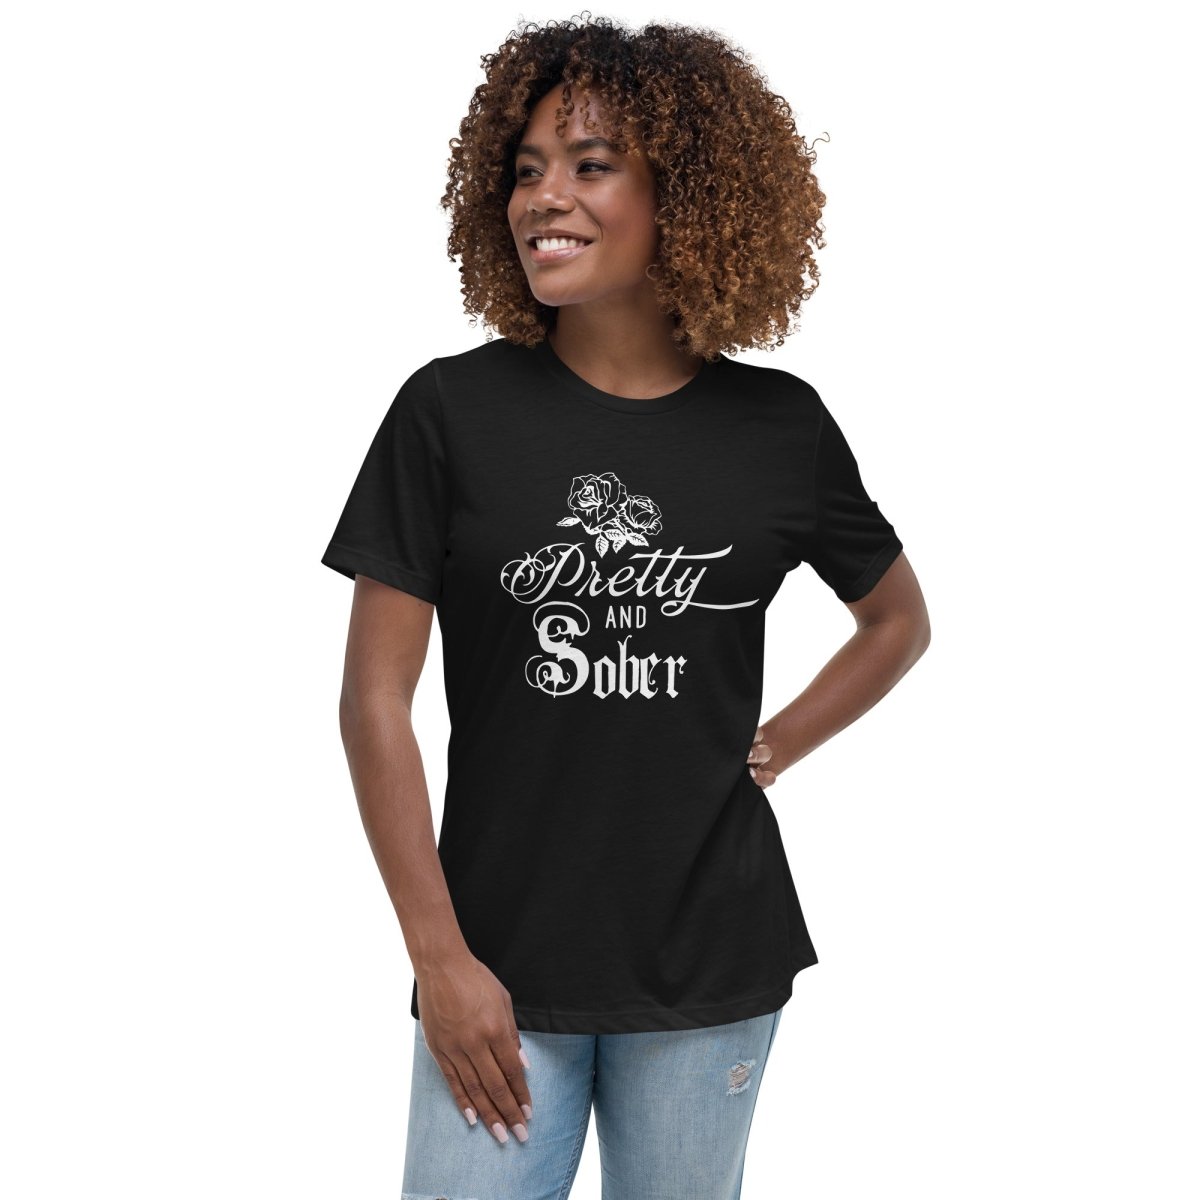 Pretty & Sober - Women's Relaxed Elegance Tee - Clean & Sober